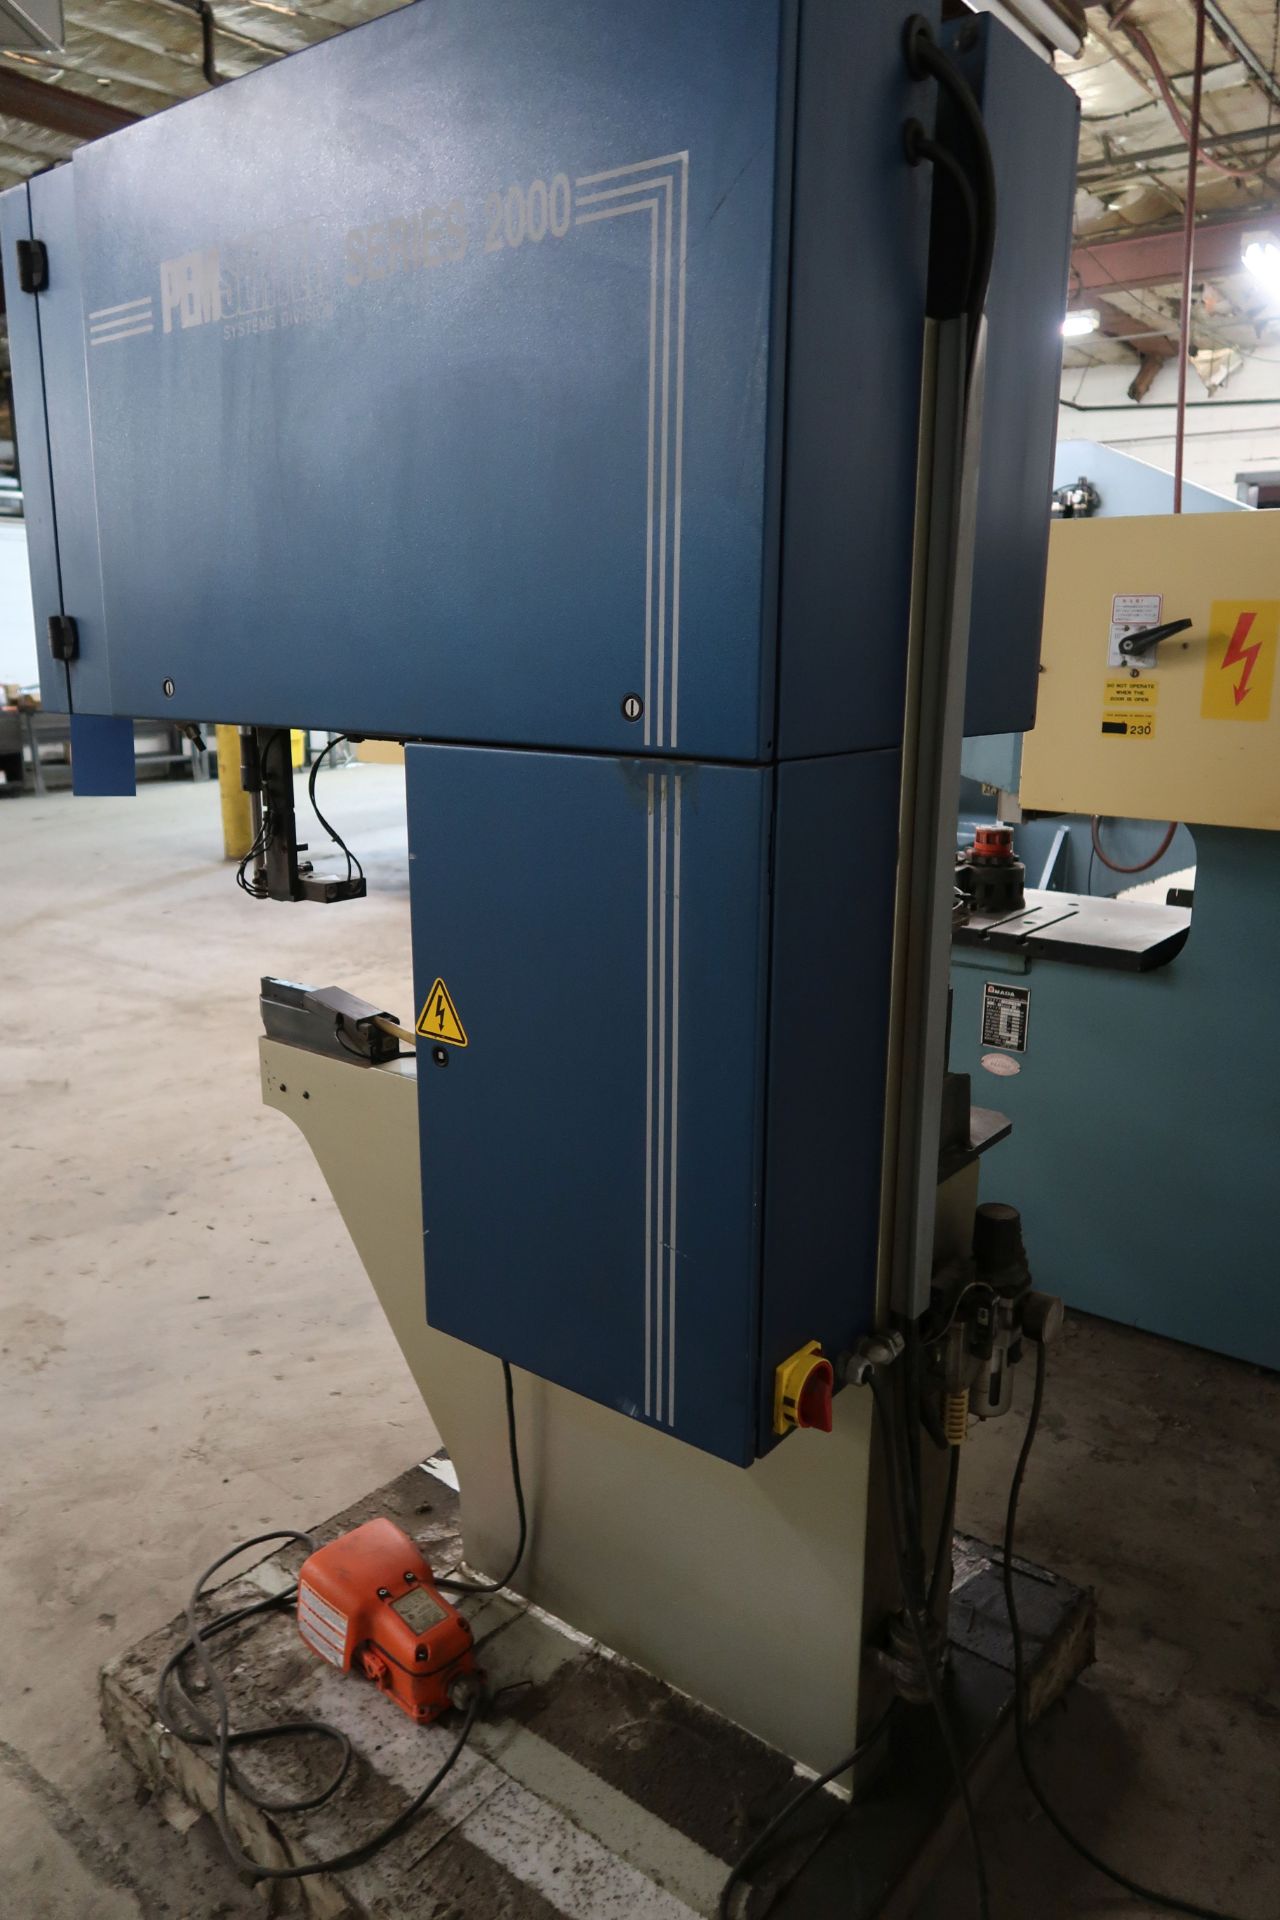 PEMSERTER SERIES 2000A HARDWARE INSERTION PRESS; S/N 2015A-302, 115 VOLTS, SINGLE PHASE, 85 PSI, AIR - Image 5 of 7